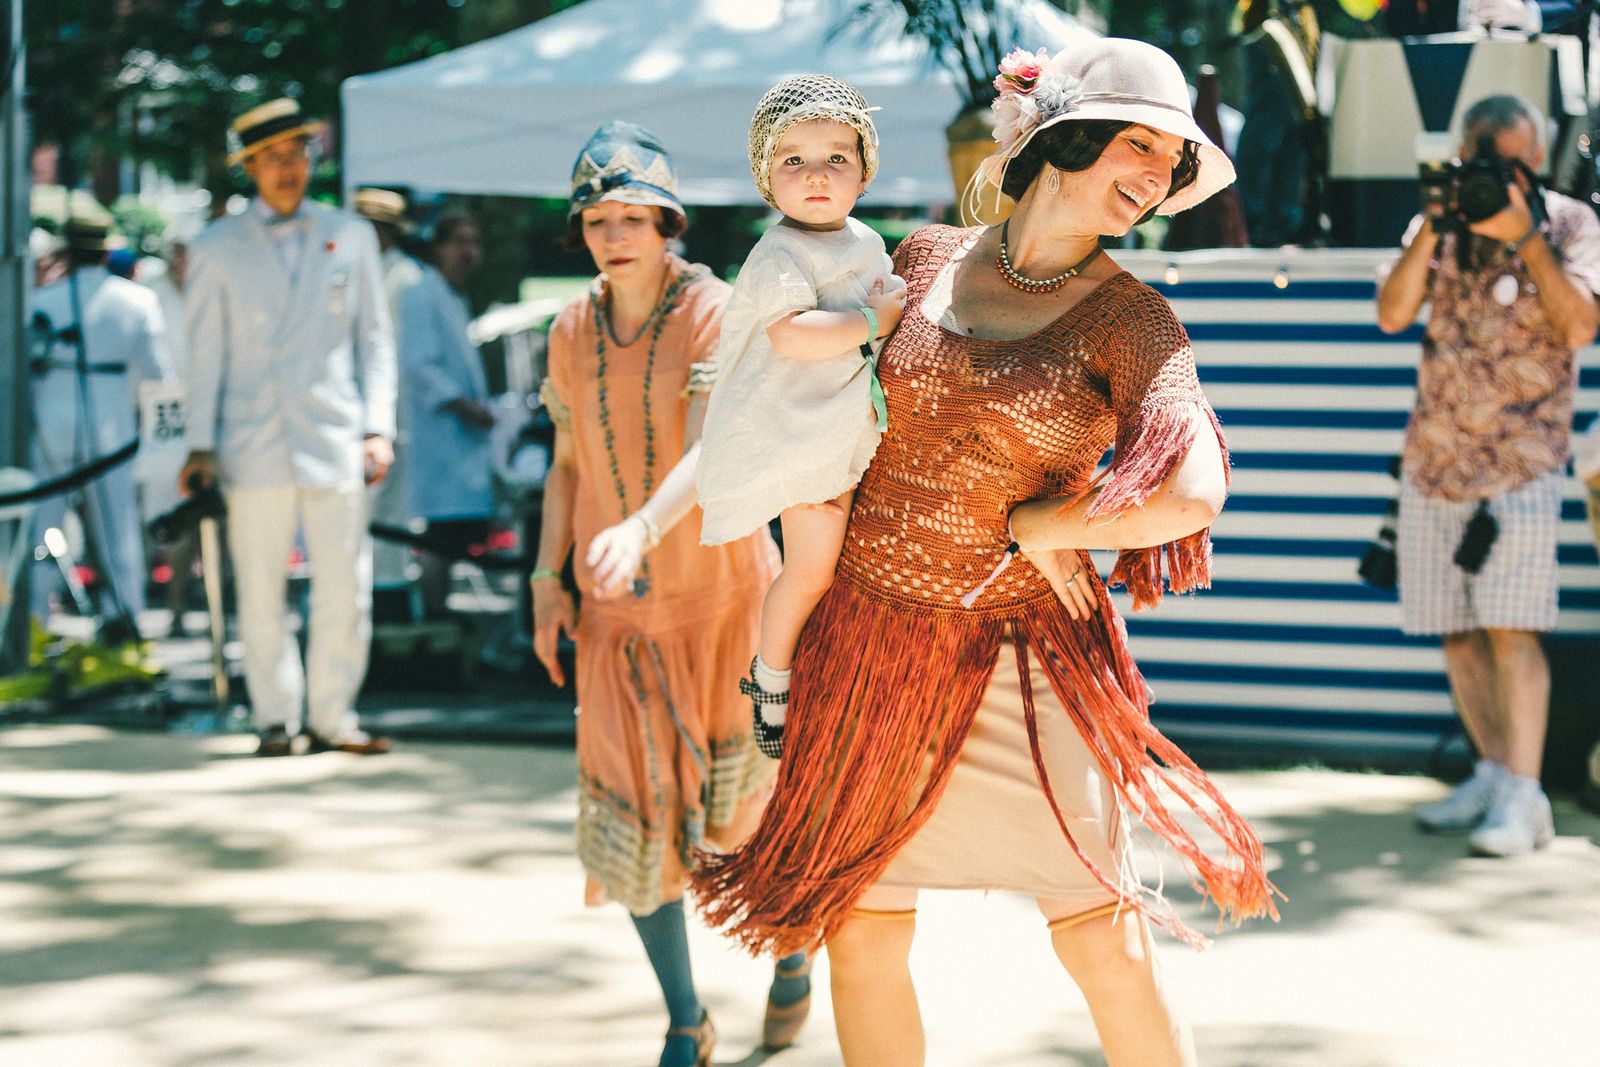 A mom and baby at the <a href="http://ny.racked.com/2015/6/16/8786627/jazz-age-lawn-party-2015-photos#4769478">Jazz Age Lawn Party</a> in 2015